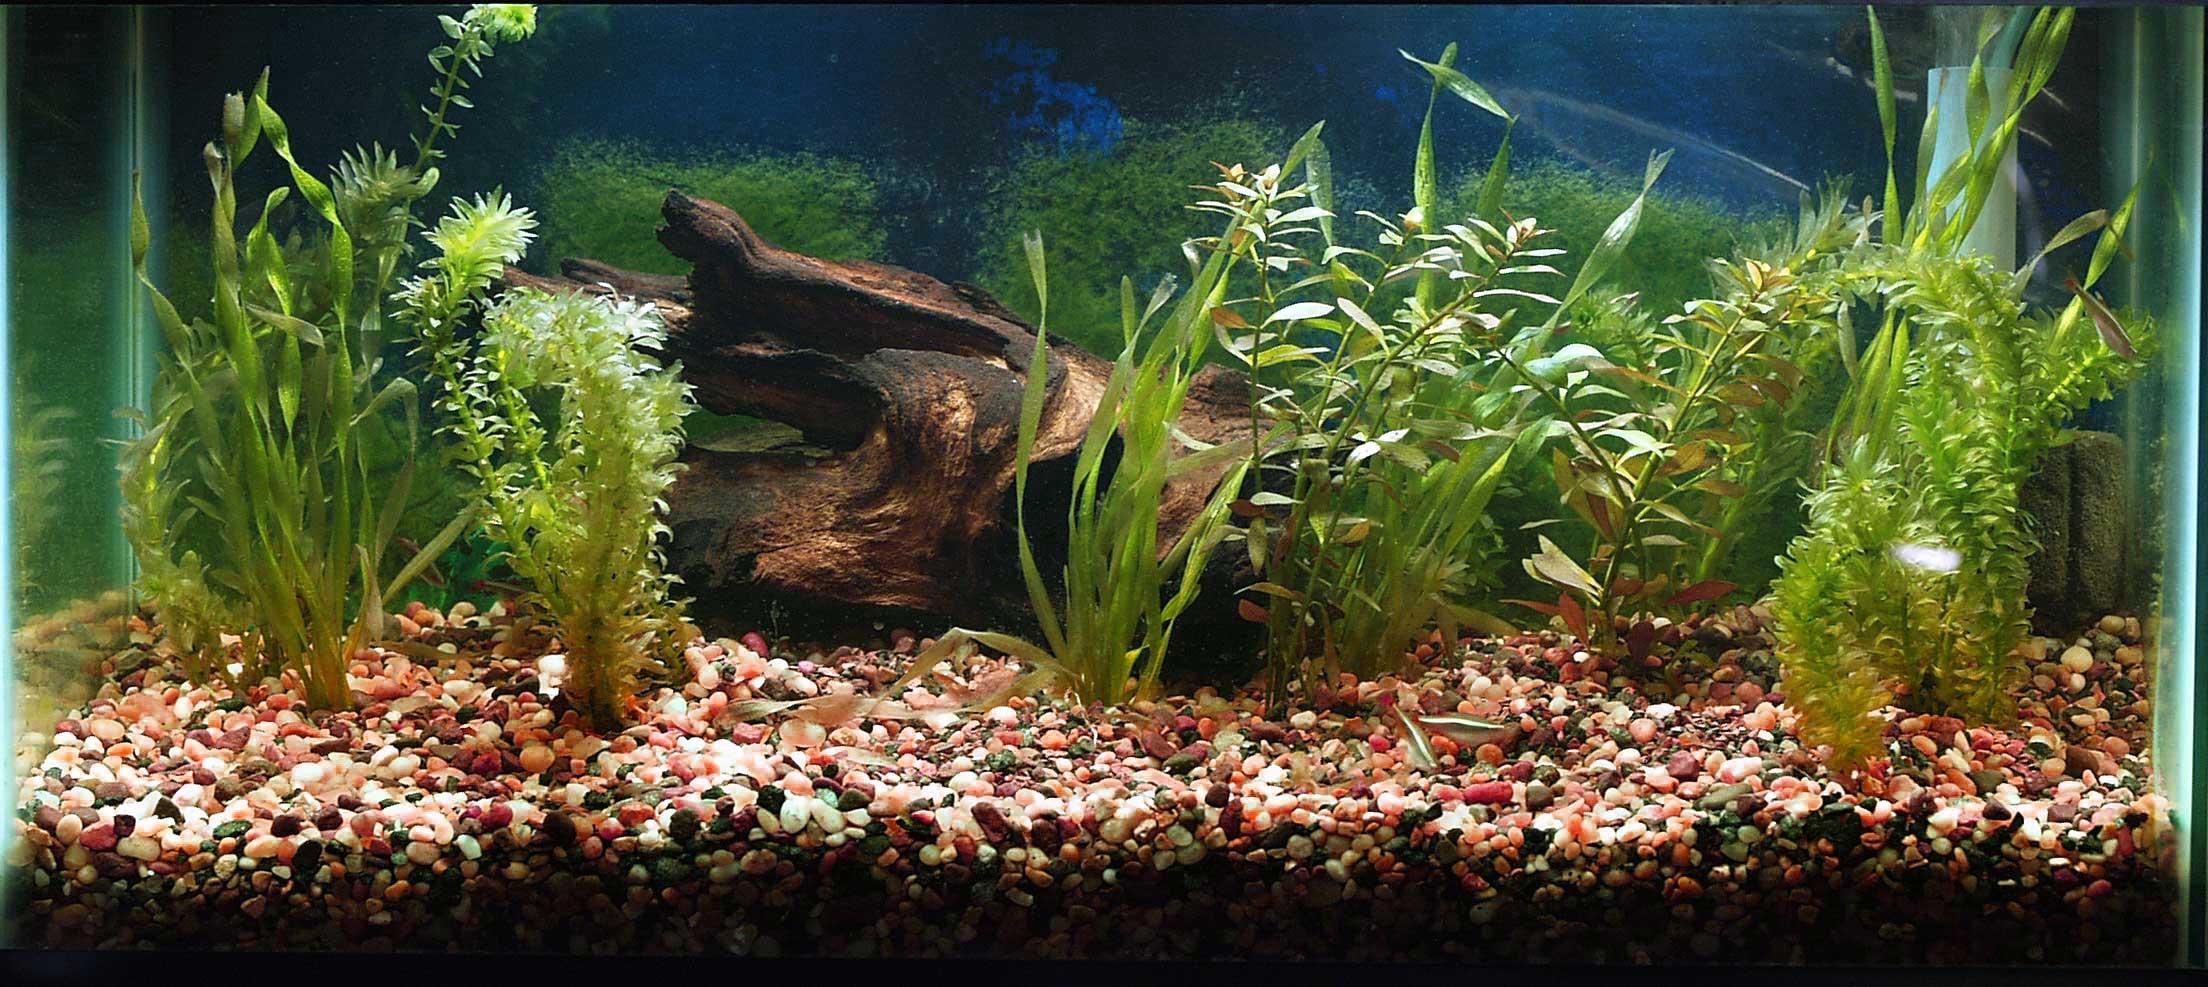 The Planted 15 long